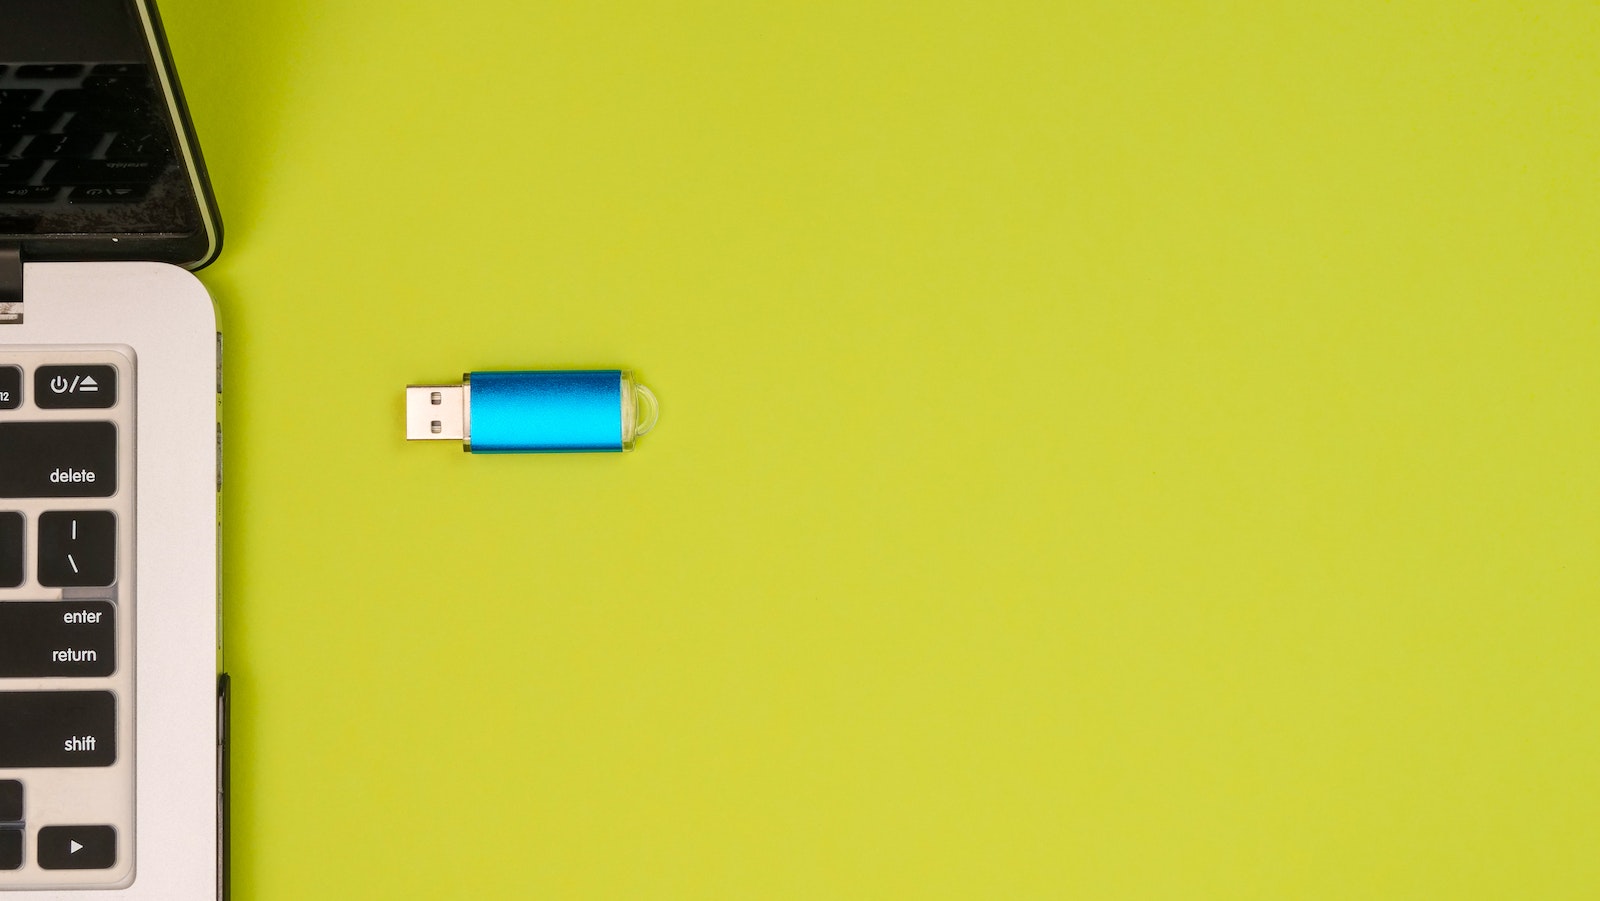 How big of a flash drive do I need for Windows 10